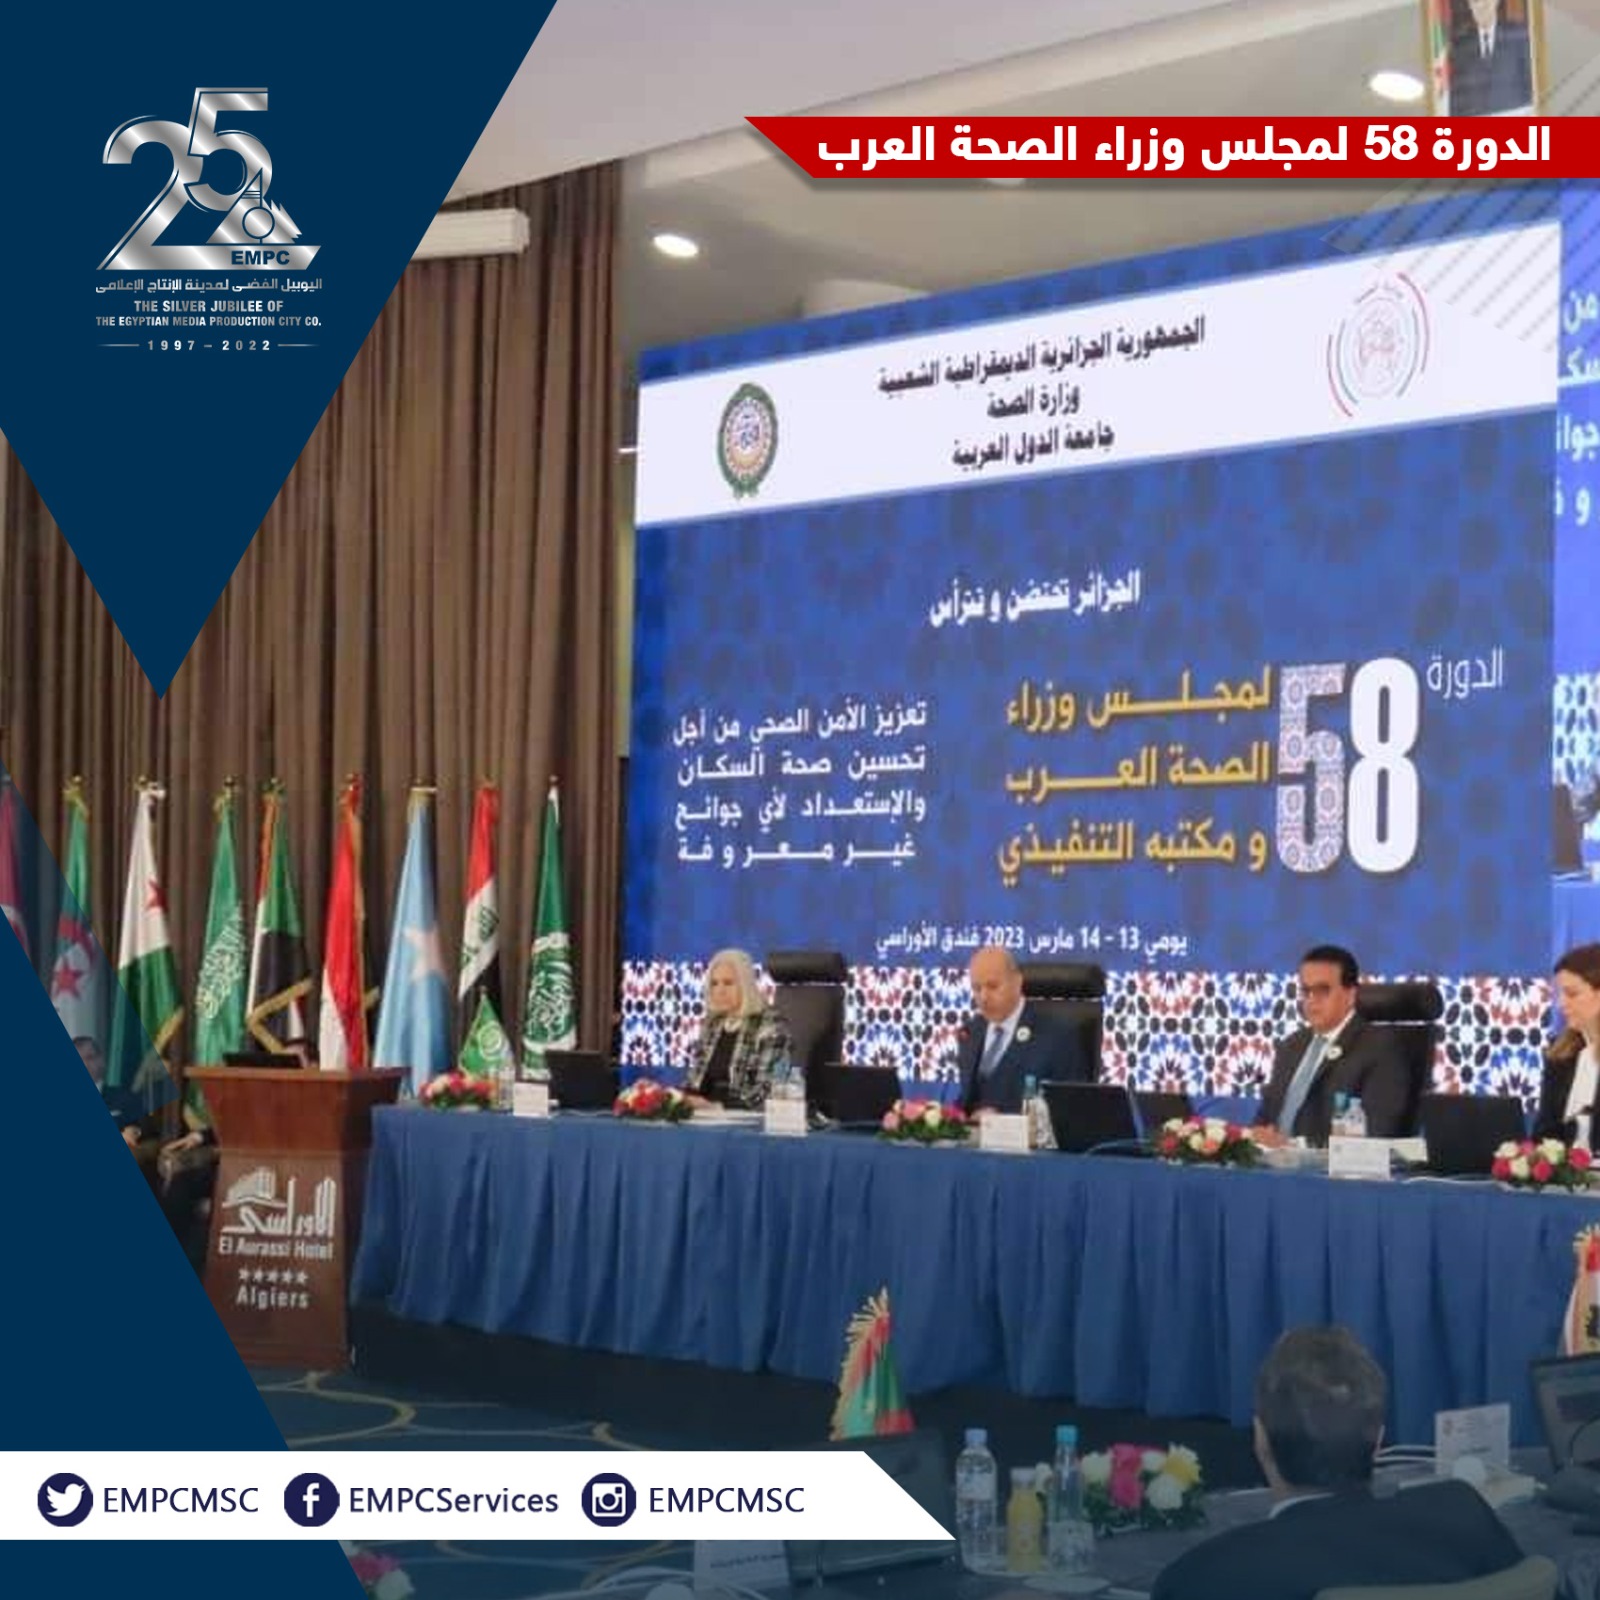  the 58th session of the Council of Arab Ministers of Health